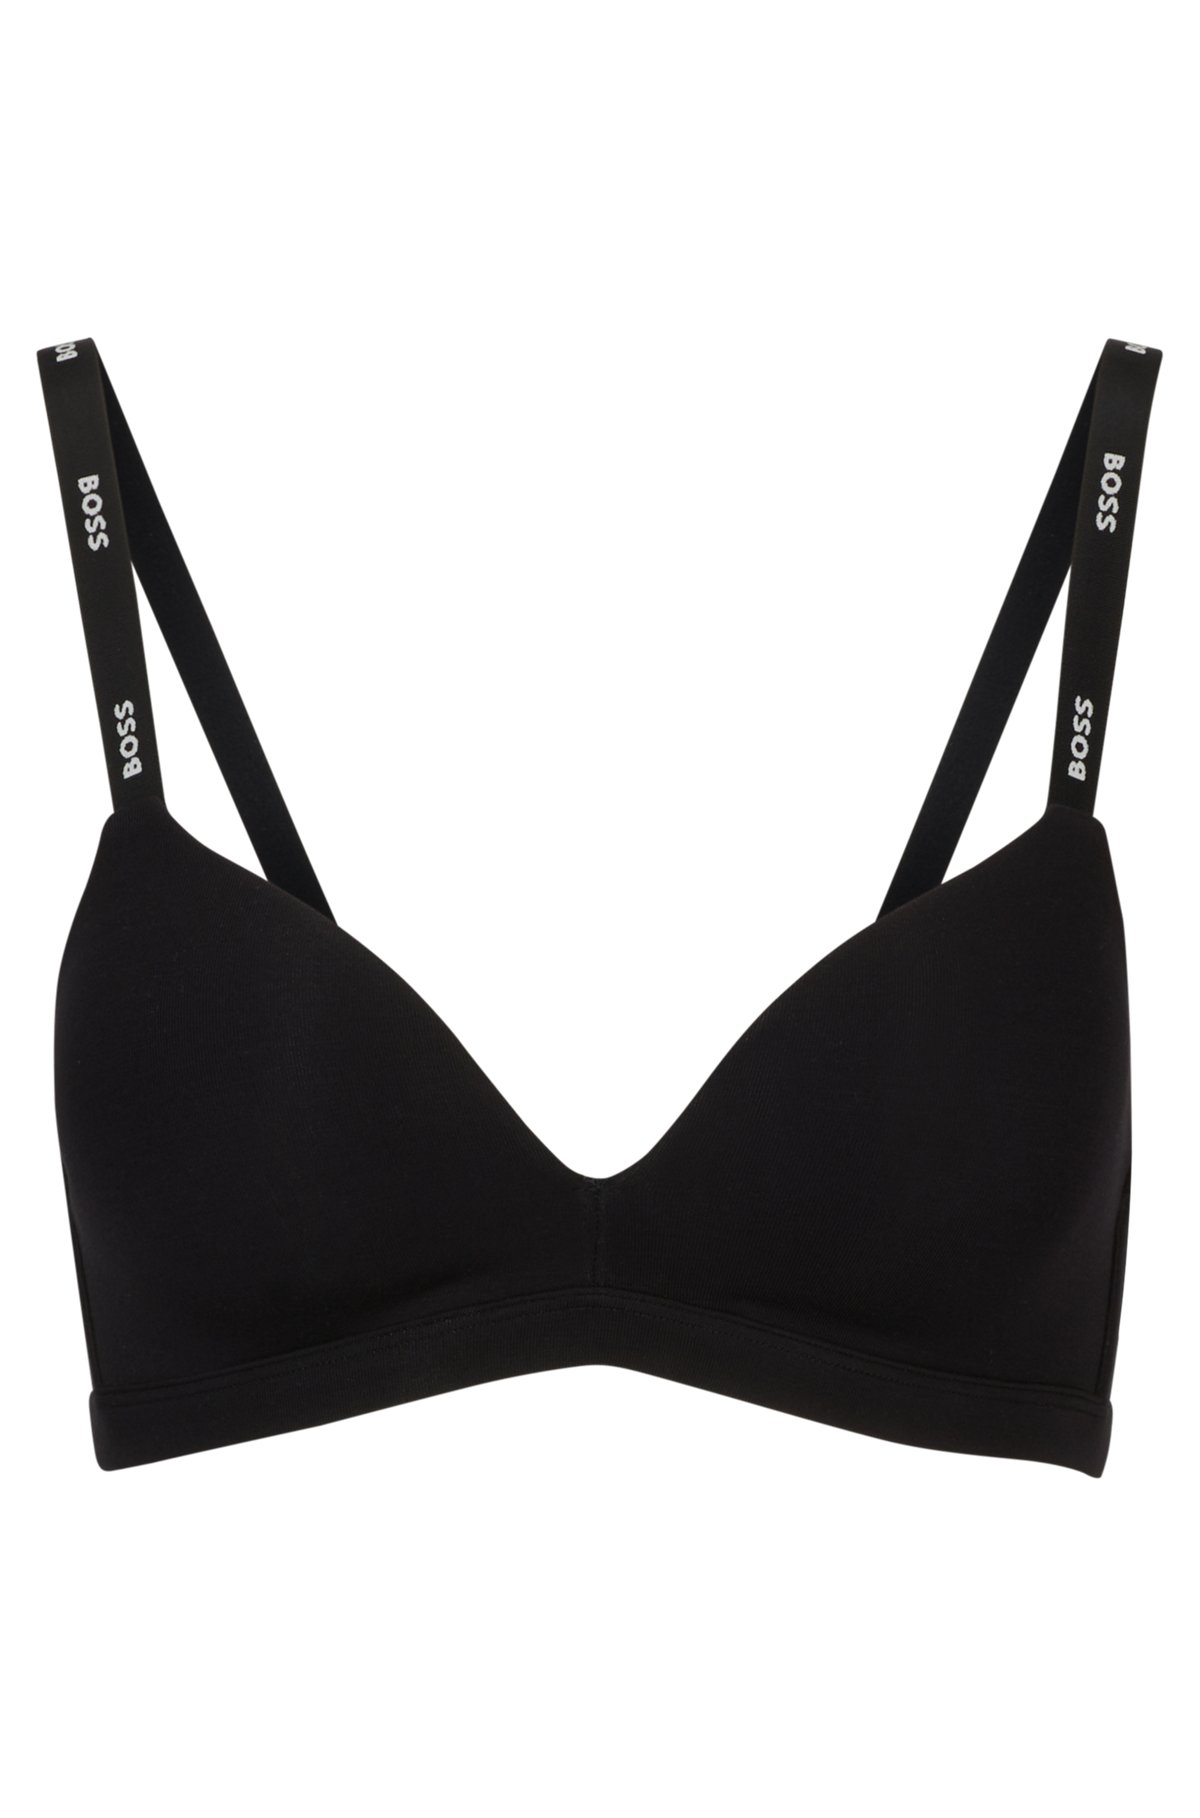 BOSS - Padded triangle bra with detachable branded straps